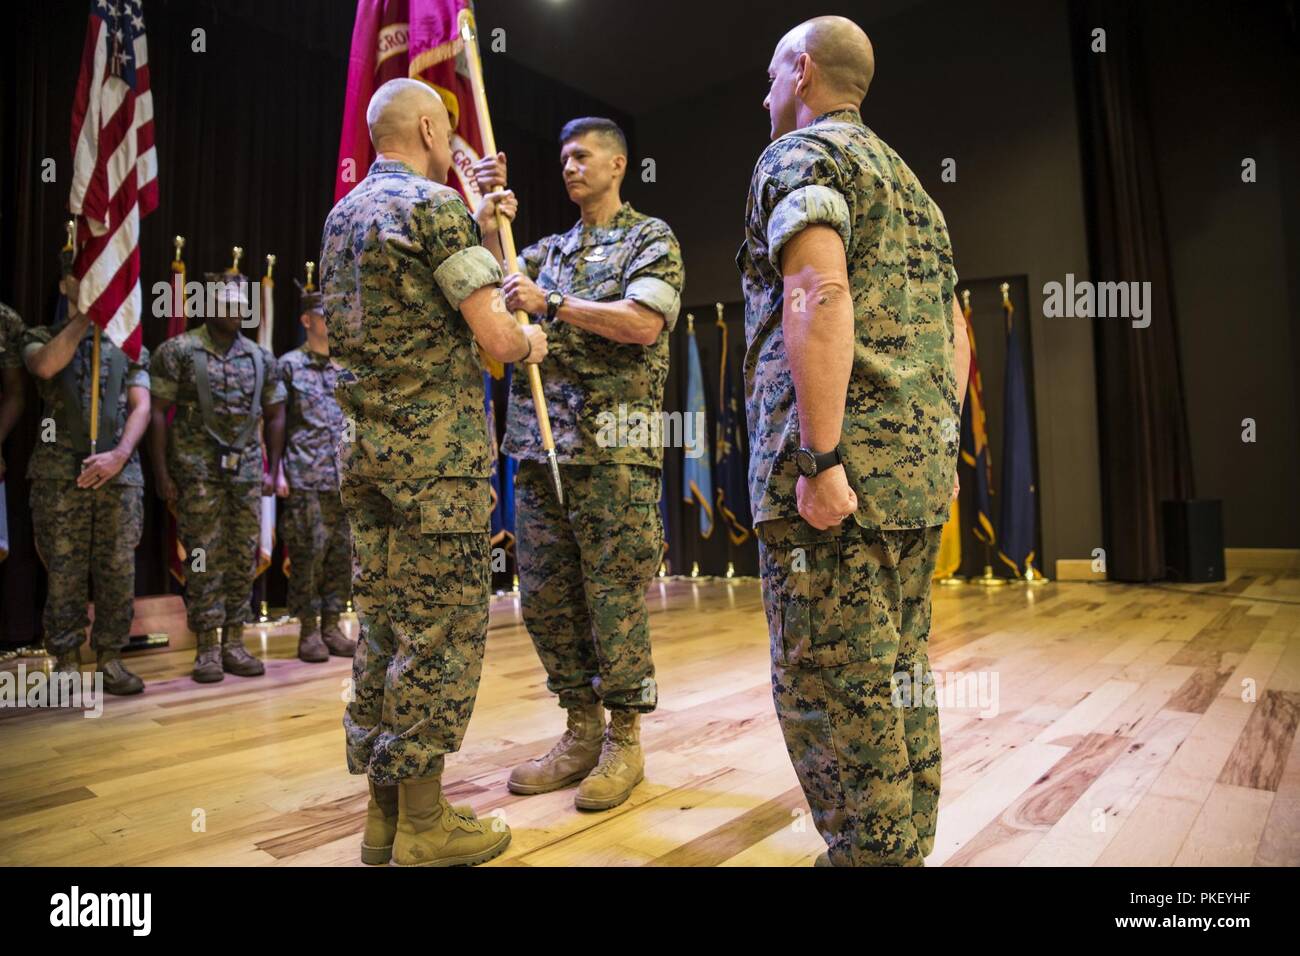 Brig. Gen. Mark Hashimoto, center, incoming commander of Force Headquarters Group, receives the colors from Maj. Gen. Michael F. Fahey, left, outgoing commander of FHG, during the change of command ceremony at the Federal City Auditorium, New Orleans, Aug. 3, 2018. While addressing the attendees, Fahey expressed his total confidence in Hashimoto as the new commander. Stock Photo